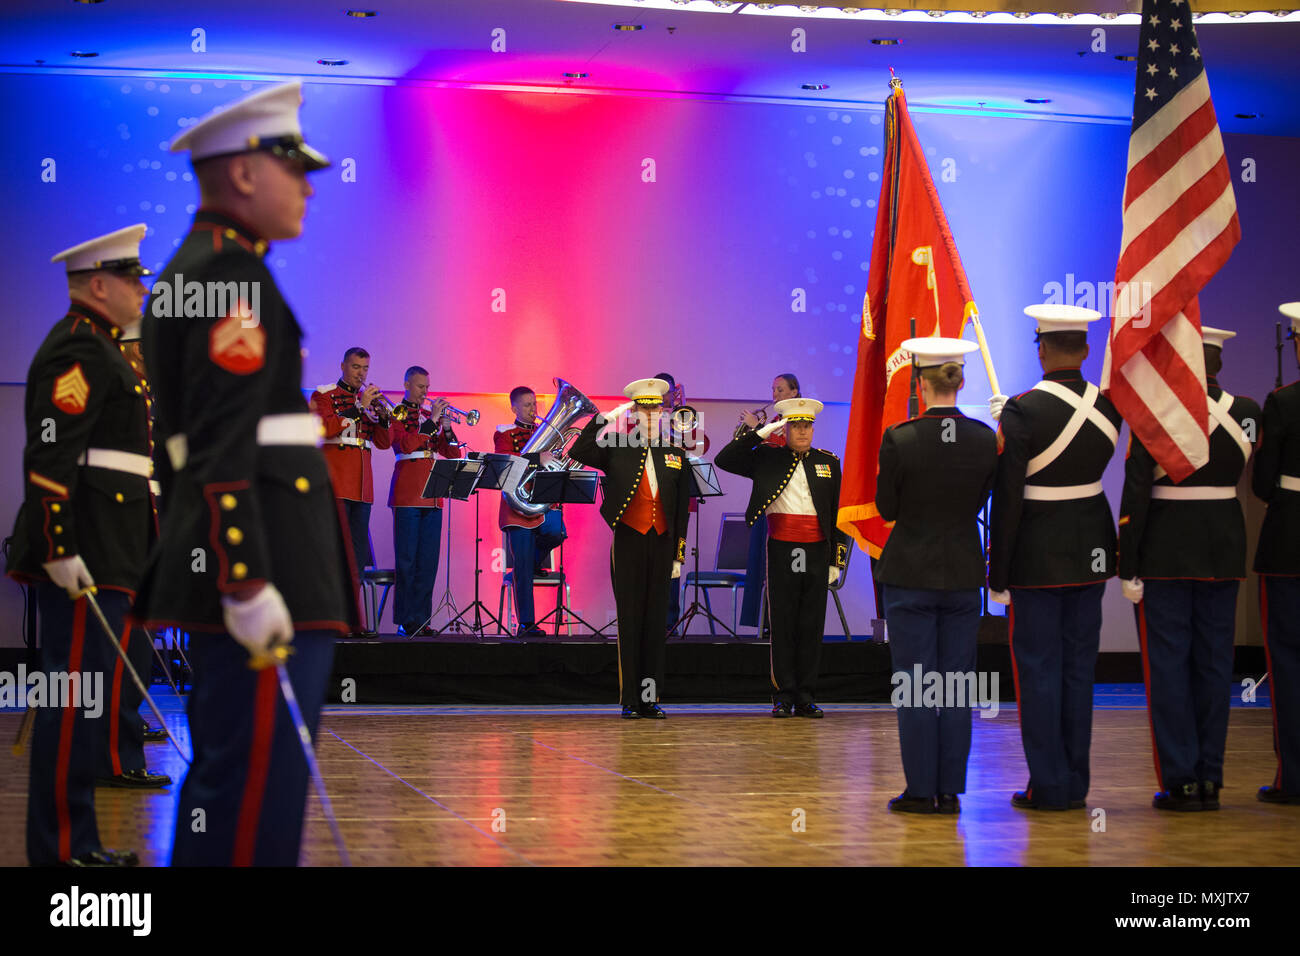 The Headquarters & Service Battalion Color Guard present colors during the Headquarters & Service Battalion Marine Corps Ball at the Renaissance Arlington Capitol View Hotel, Arlington, Va., Nov. 05, 2016. The ball was held in celebration of the Marine Corps’ 241st birthday. (U.S. Marine Corps photo by Pfc. Alex A. Quiles) Stock Photo